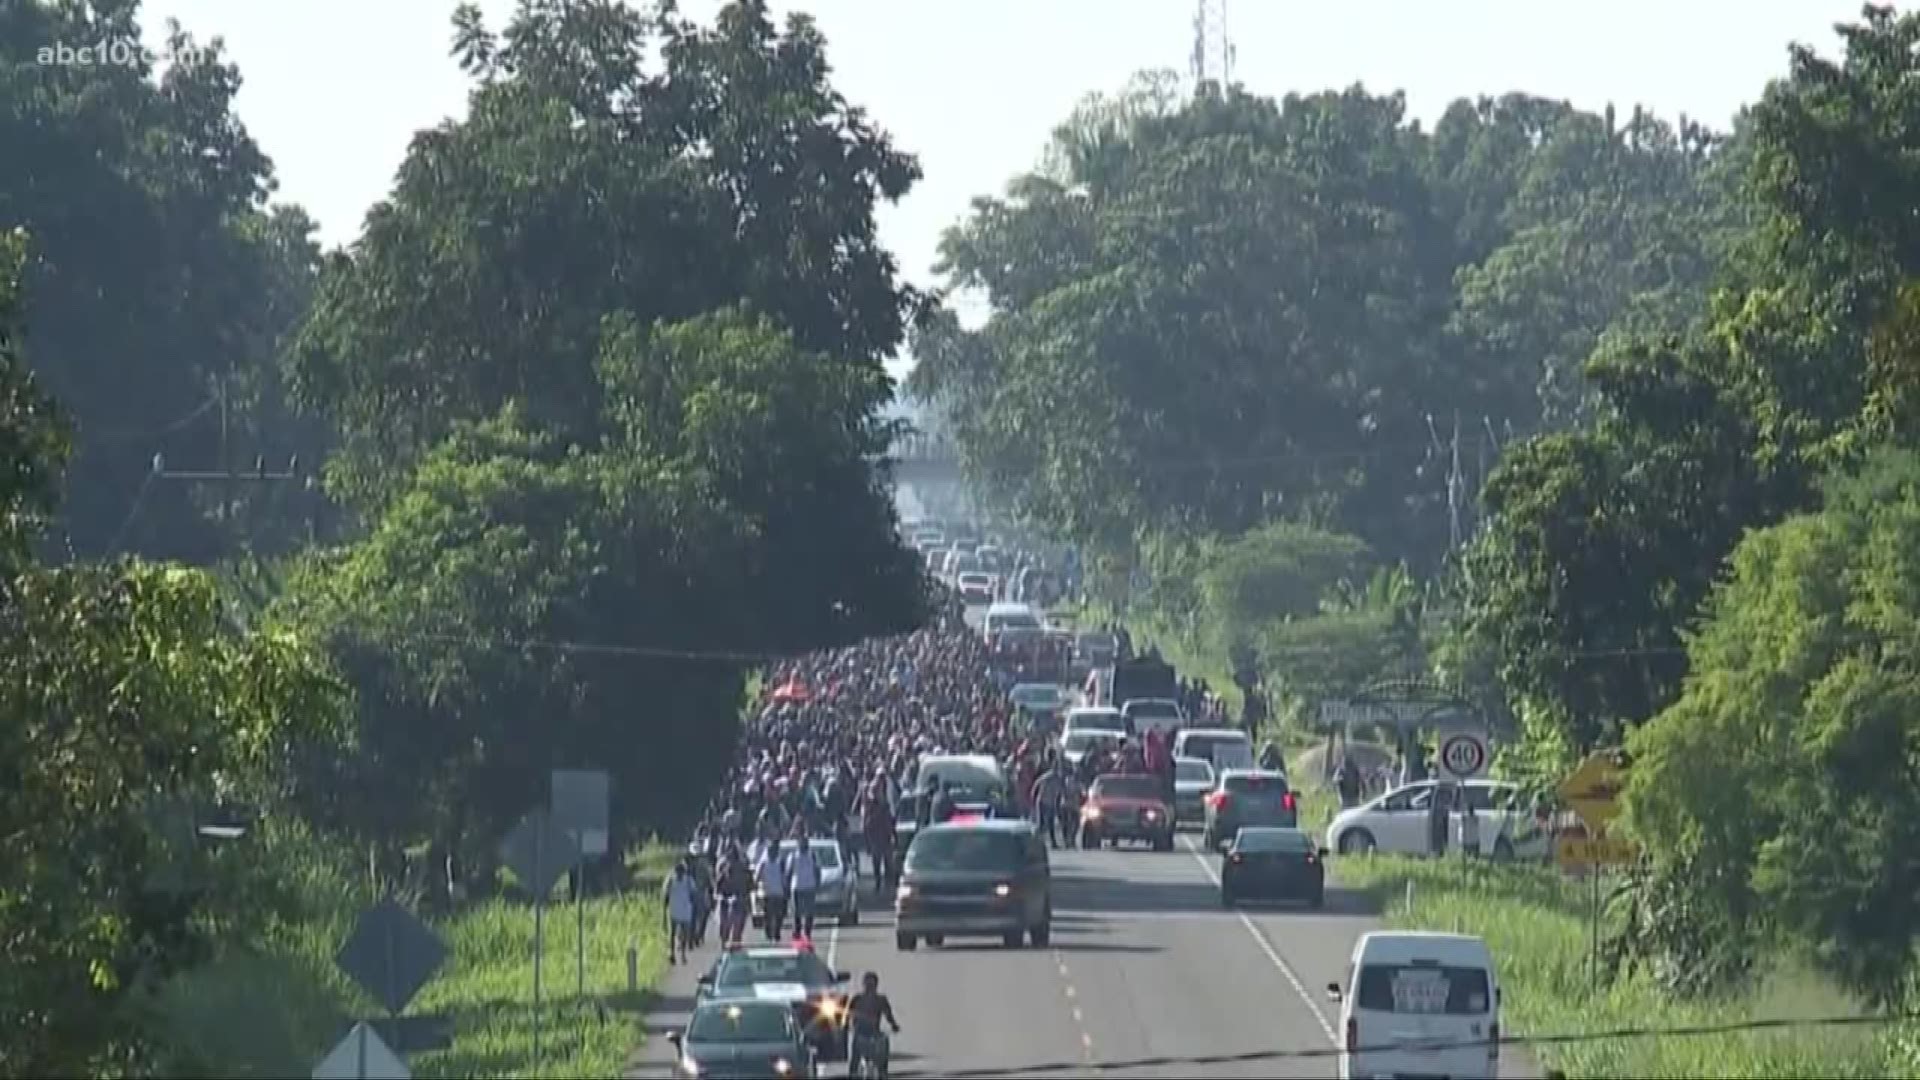 A caravan of people from Central America is moving toward the United States. It has become the hot political topic of debate. Walt Gray has more.